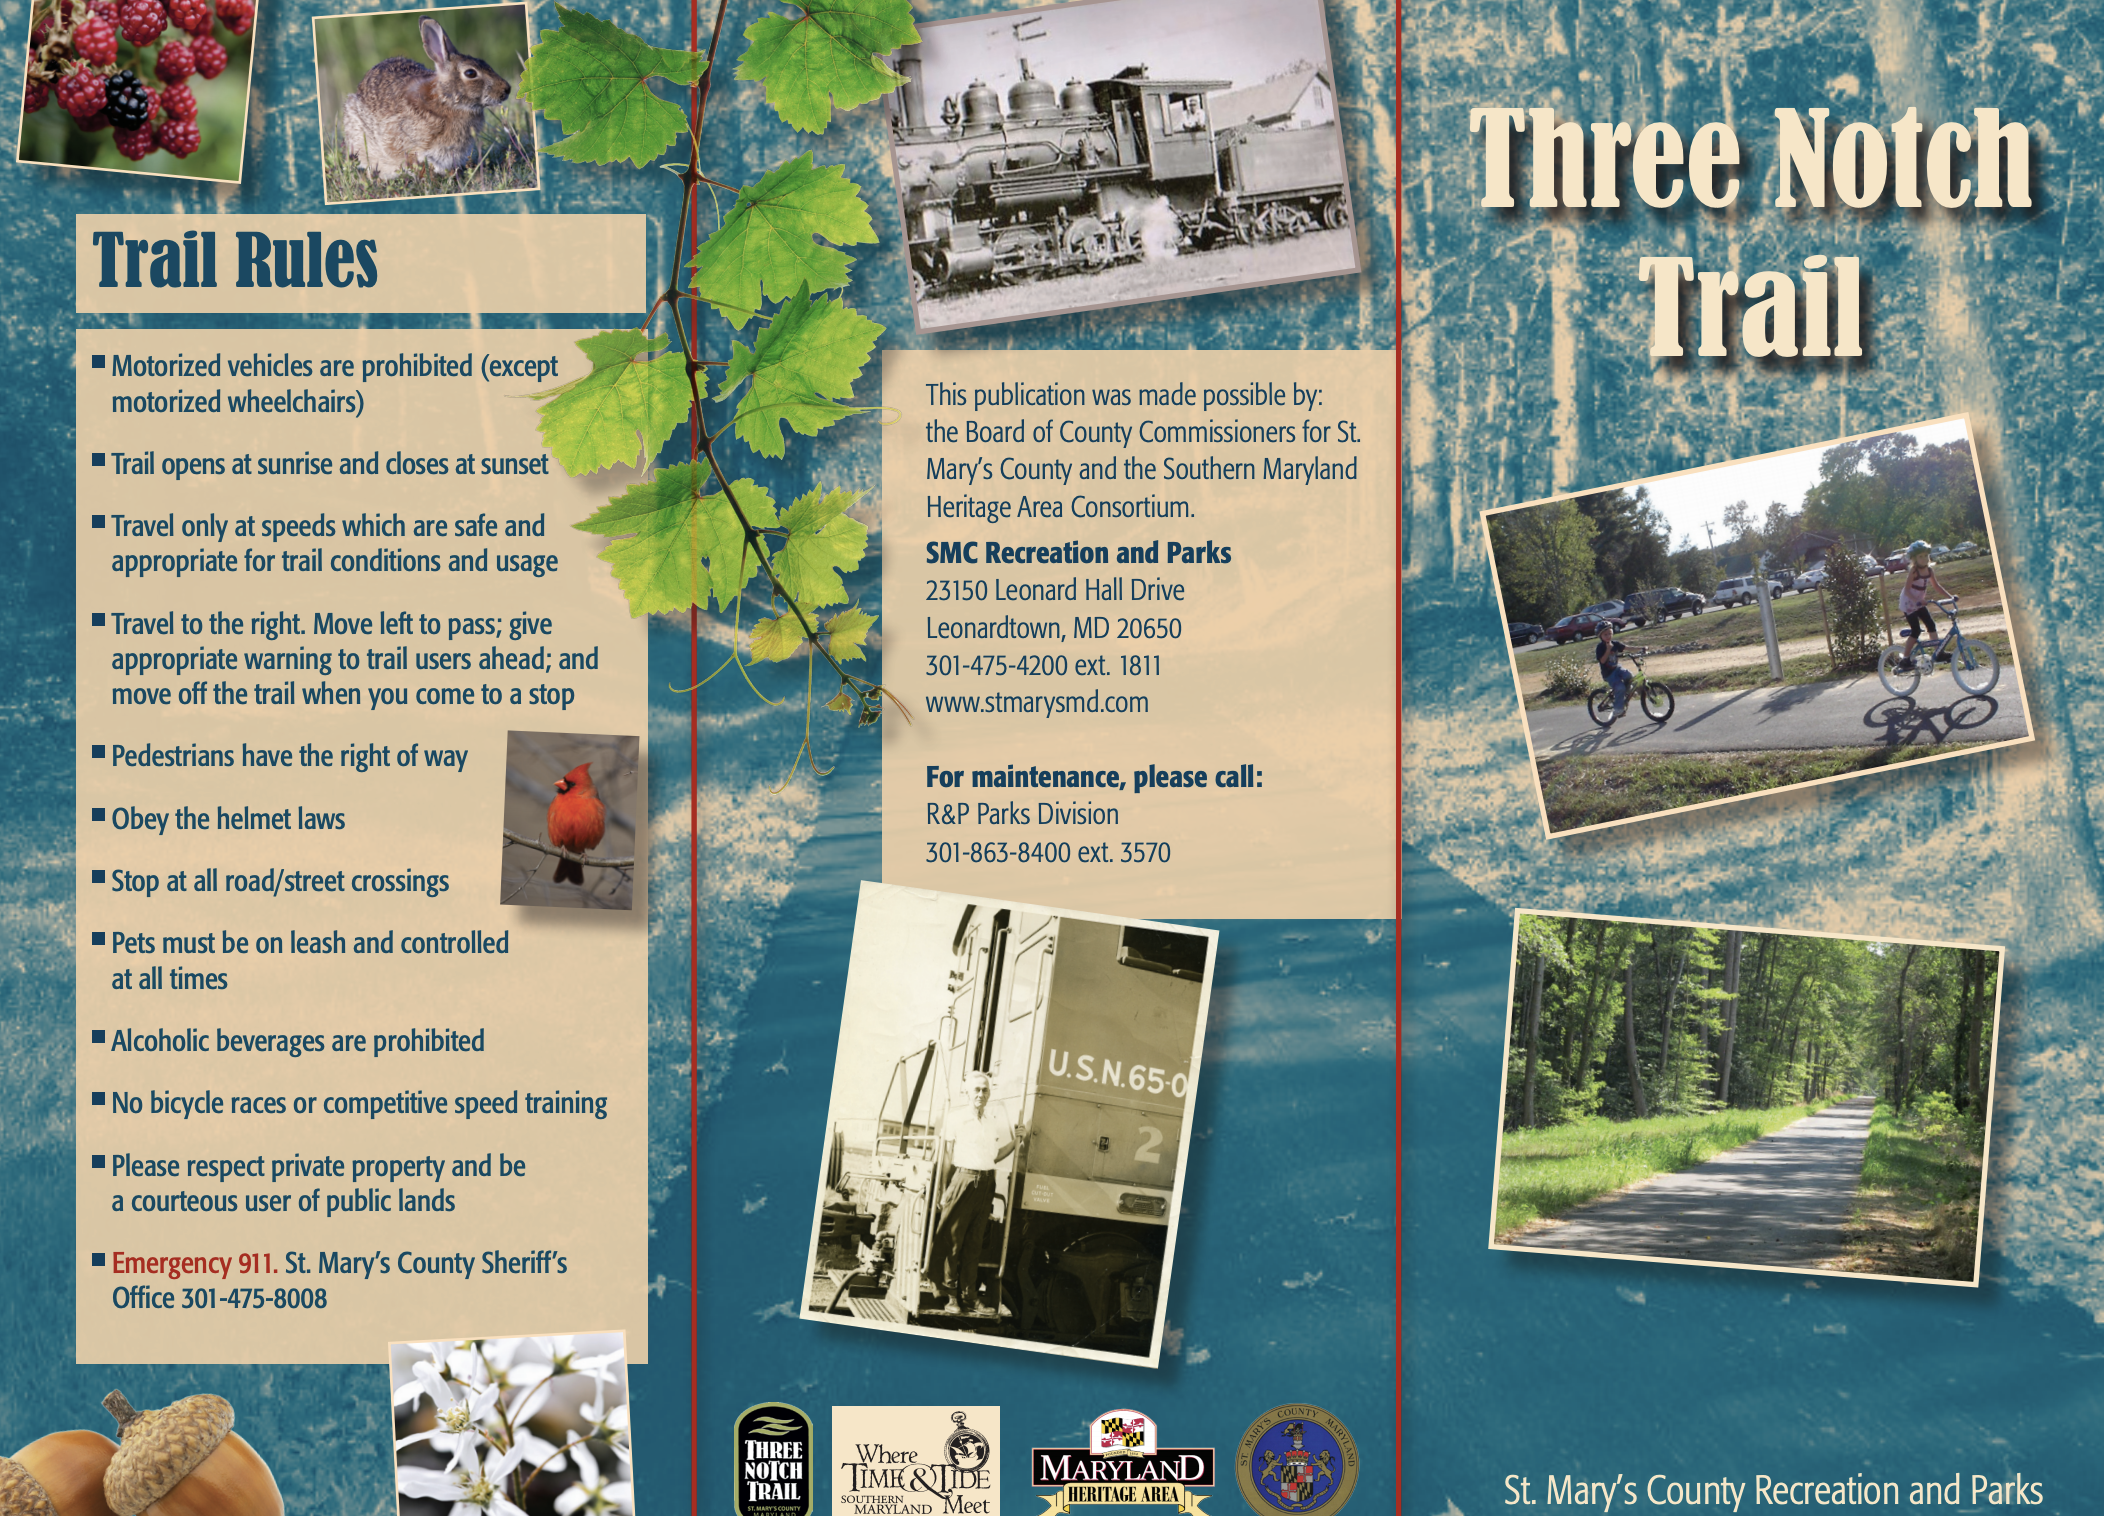 Three Notch Trail Guide from St. Mary's County Recreation and Parks